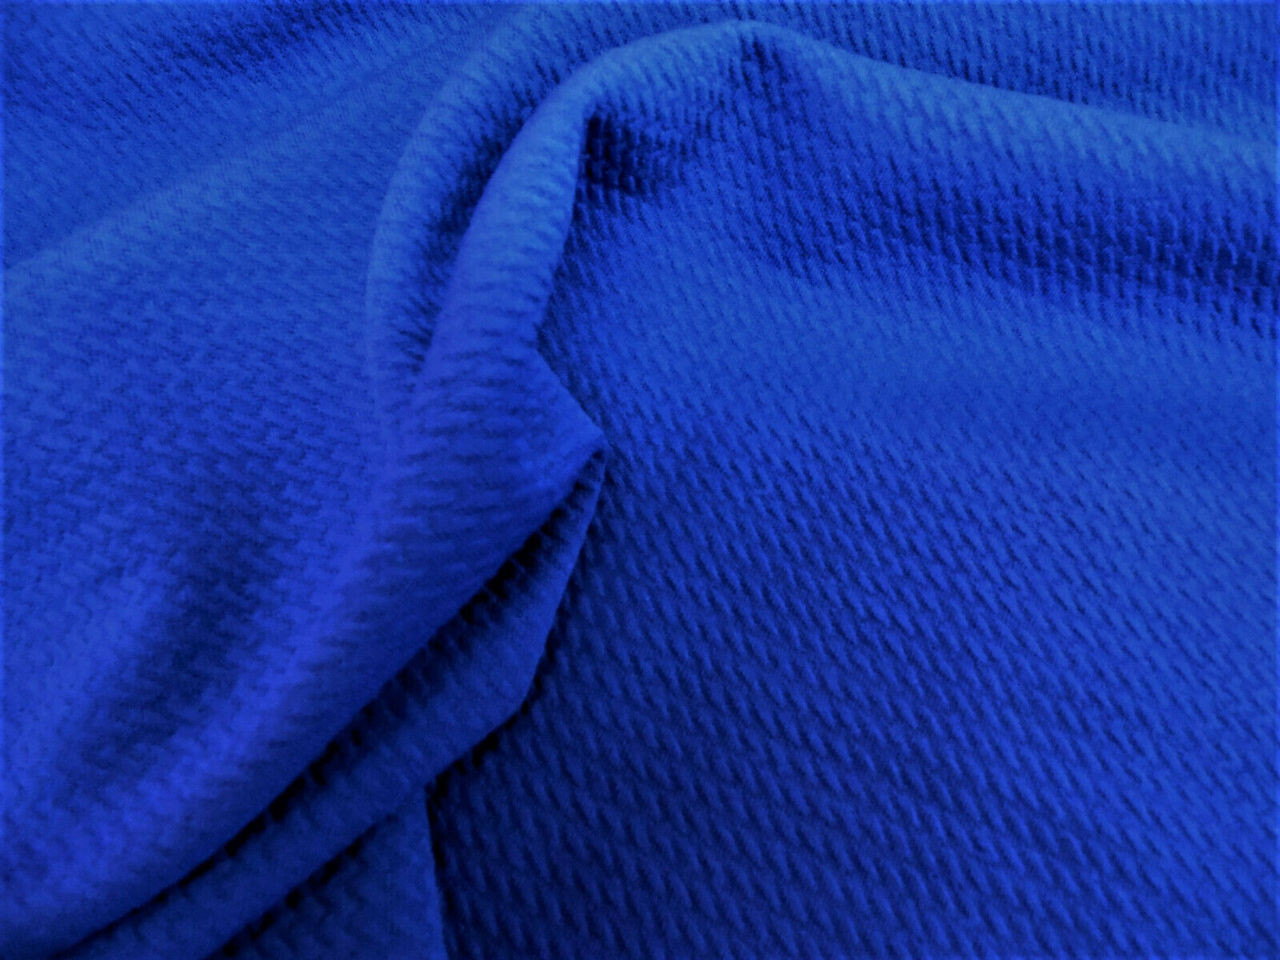 Bullet Textured Liverpool Fabric 4 way Stretch Royal Blue S12